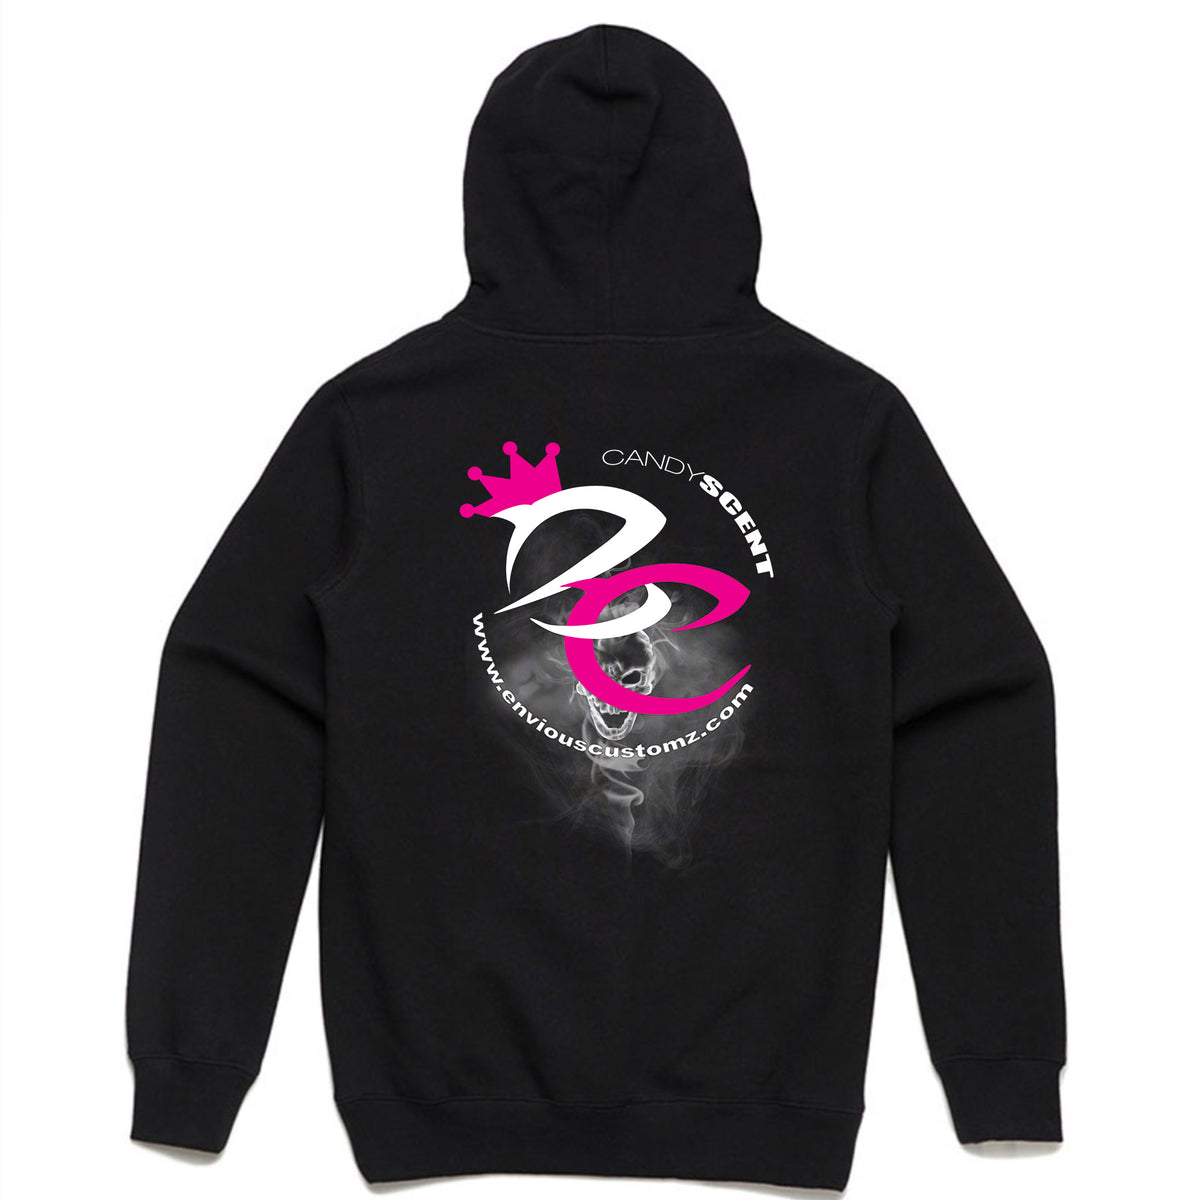 Hoodie - CANDY SCENT - ENVIOUS CUSTOMZ 